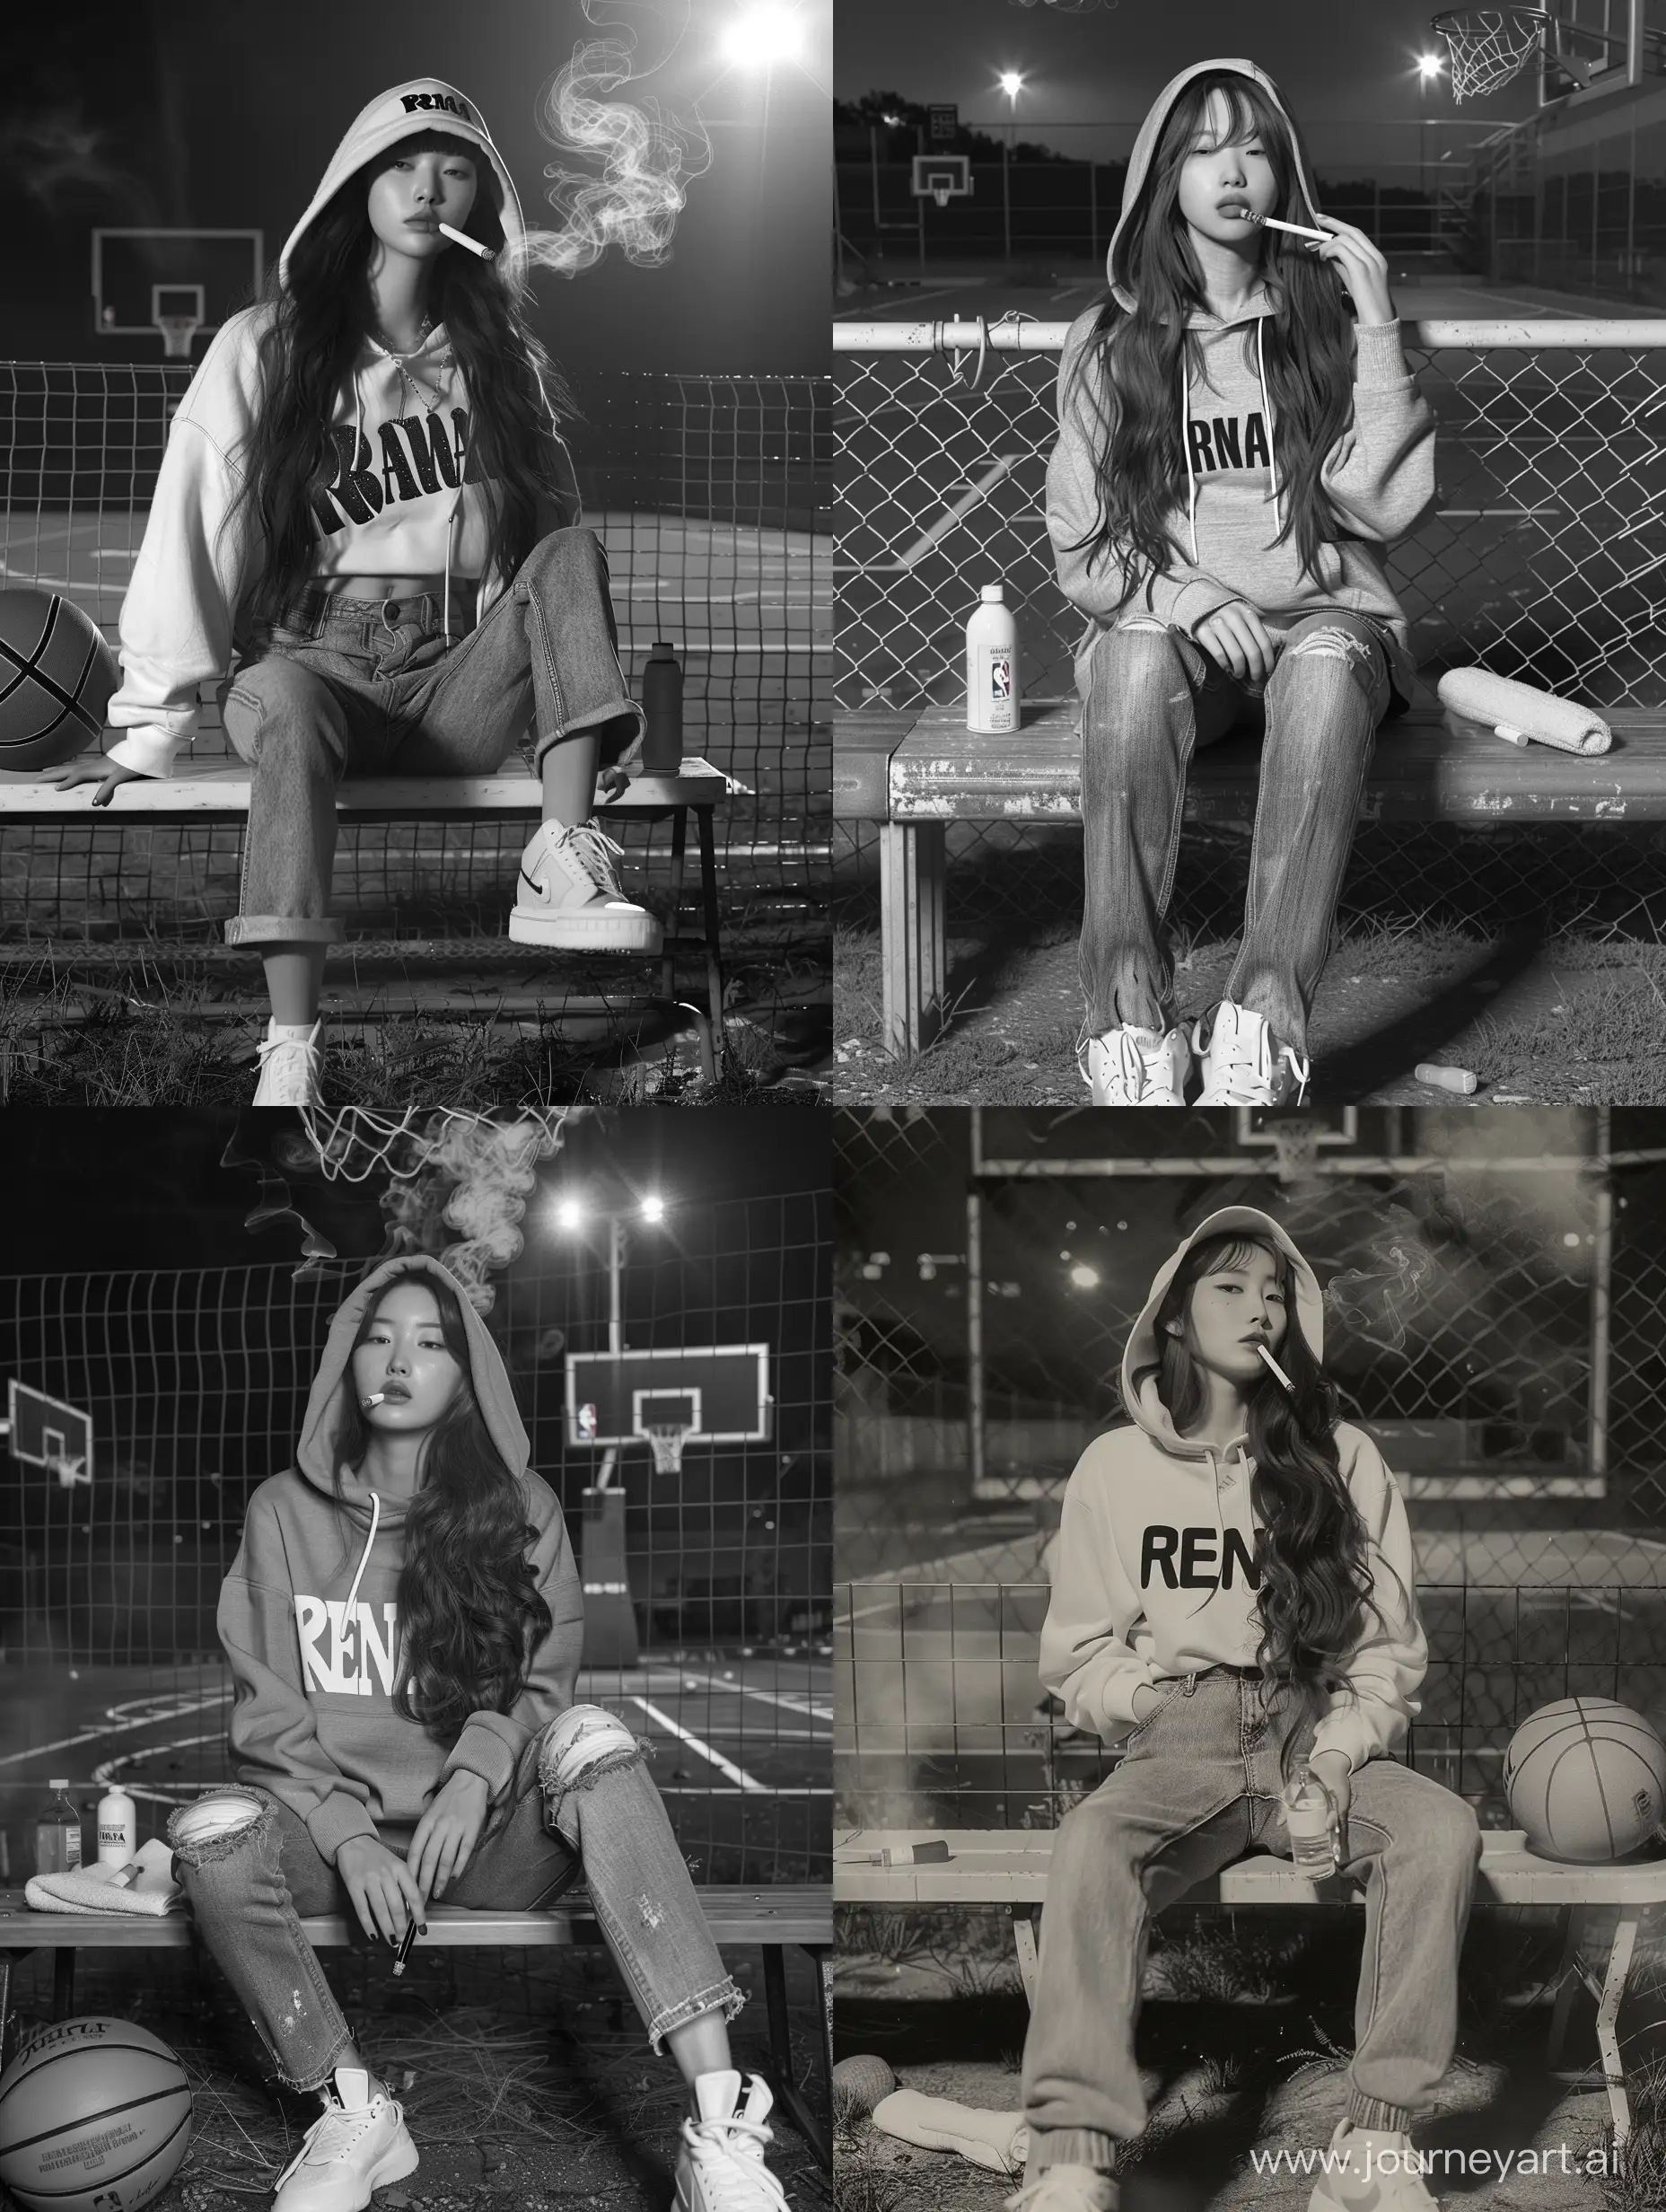 Beautiful Korean woman with long hair wearing a hoodie that says "RENA", jeans and white shoes, face must look real and detailed, sitting on a bench in front of the field fence, while smoking, basketball court background, basketball, small towel, drinking bottle, ultra HD, night bright scene, real photo, high detail, ultra sharp, 18mm lens, realistic, photography, Leica camera